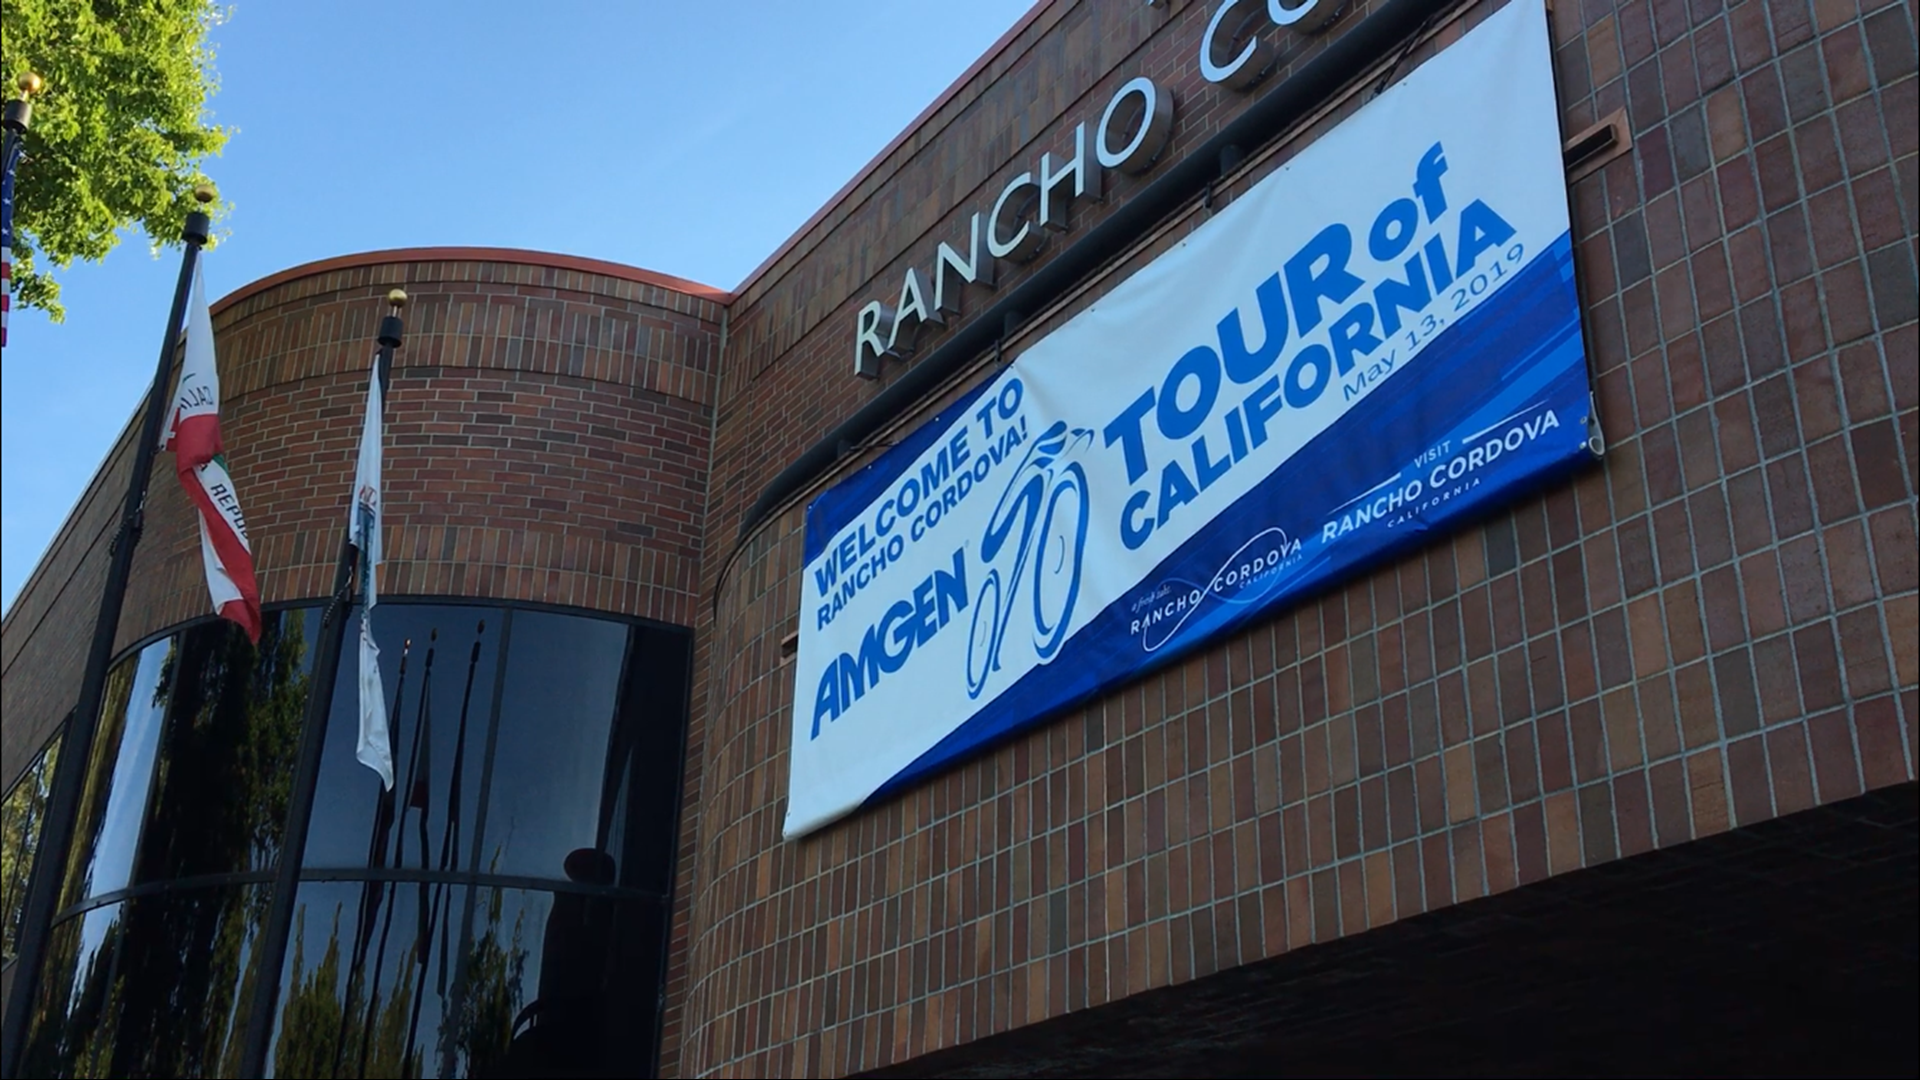 The Amgen Tour of California is being hosted by Rancho Cordova for the first time. The city and its local business are preparing for they say will be an all day event.